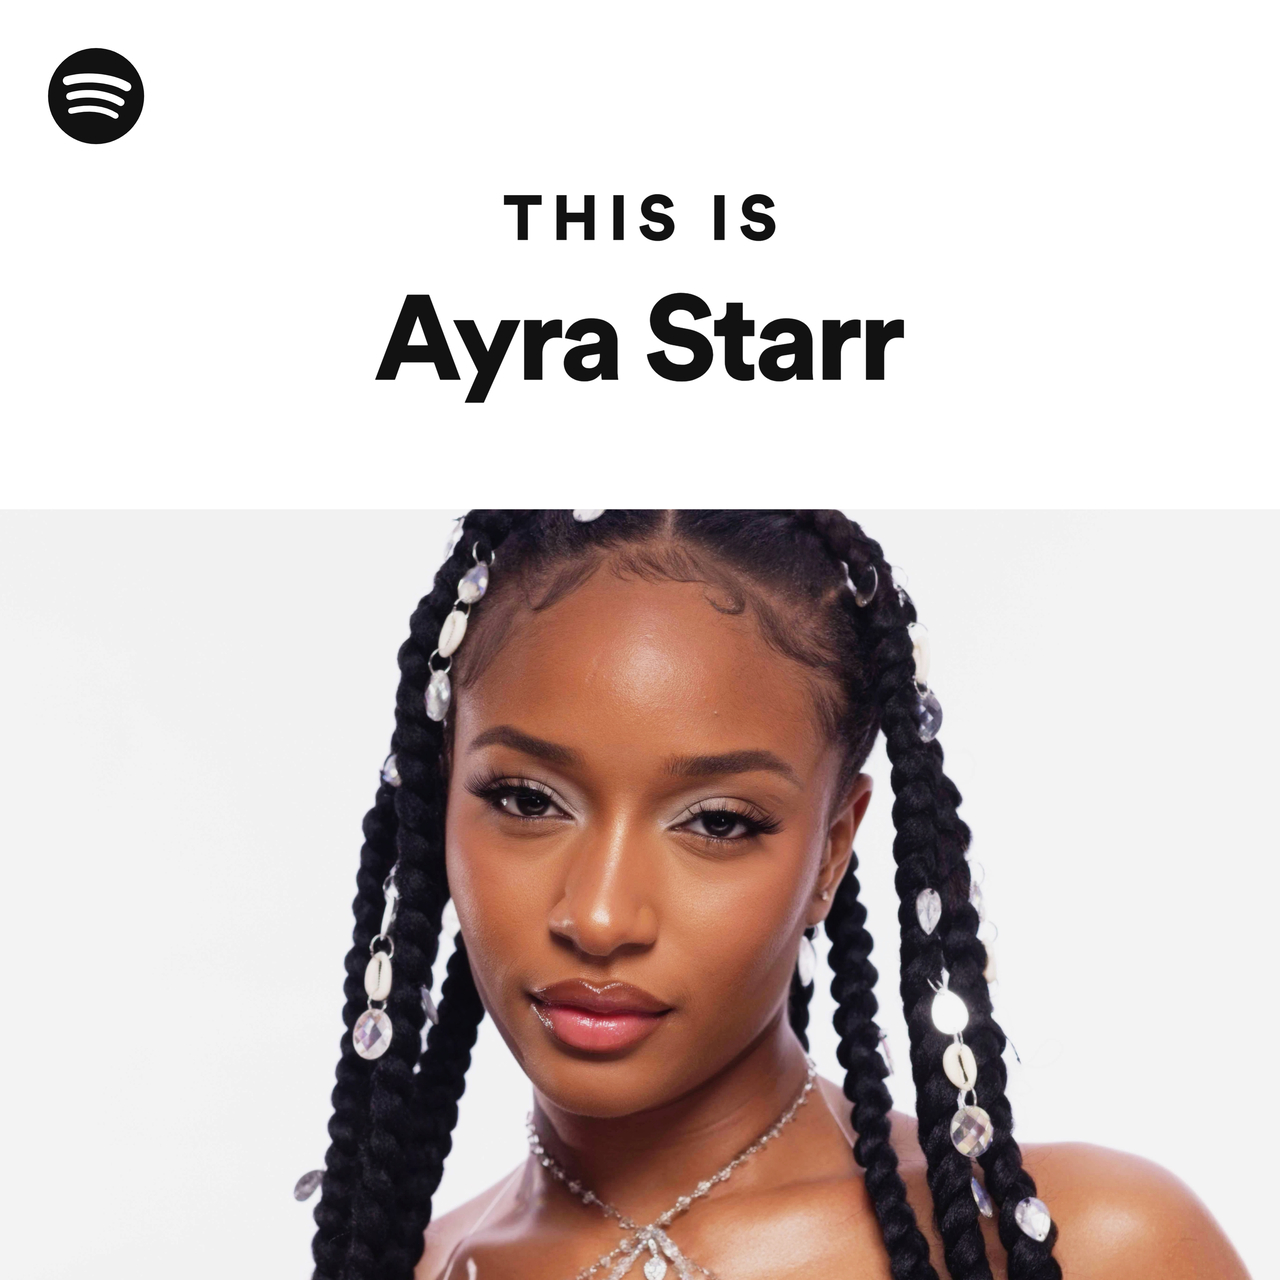 This Is Ayra Starr - playlist by Spotify | Spotify